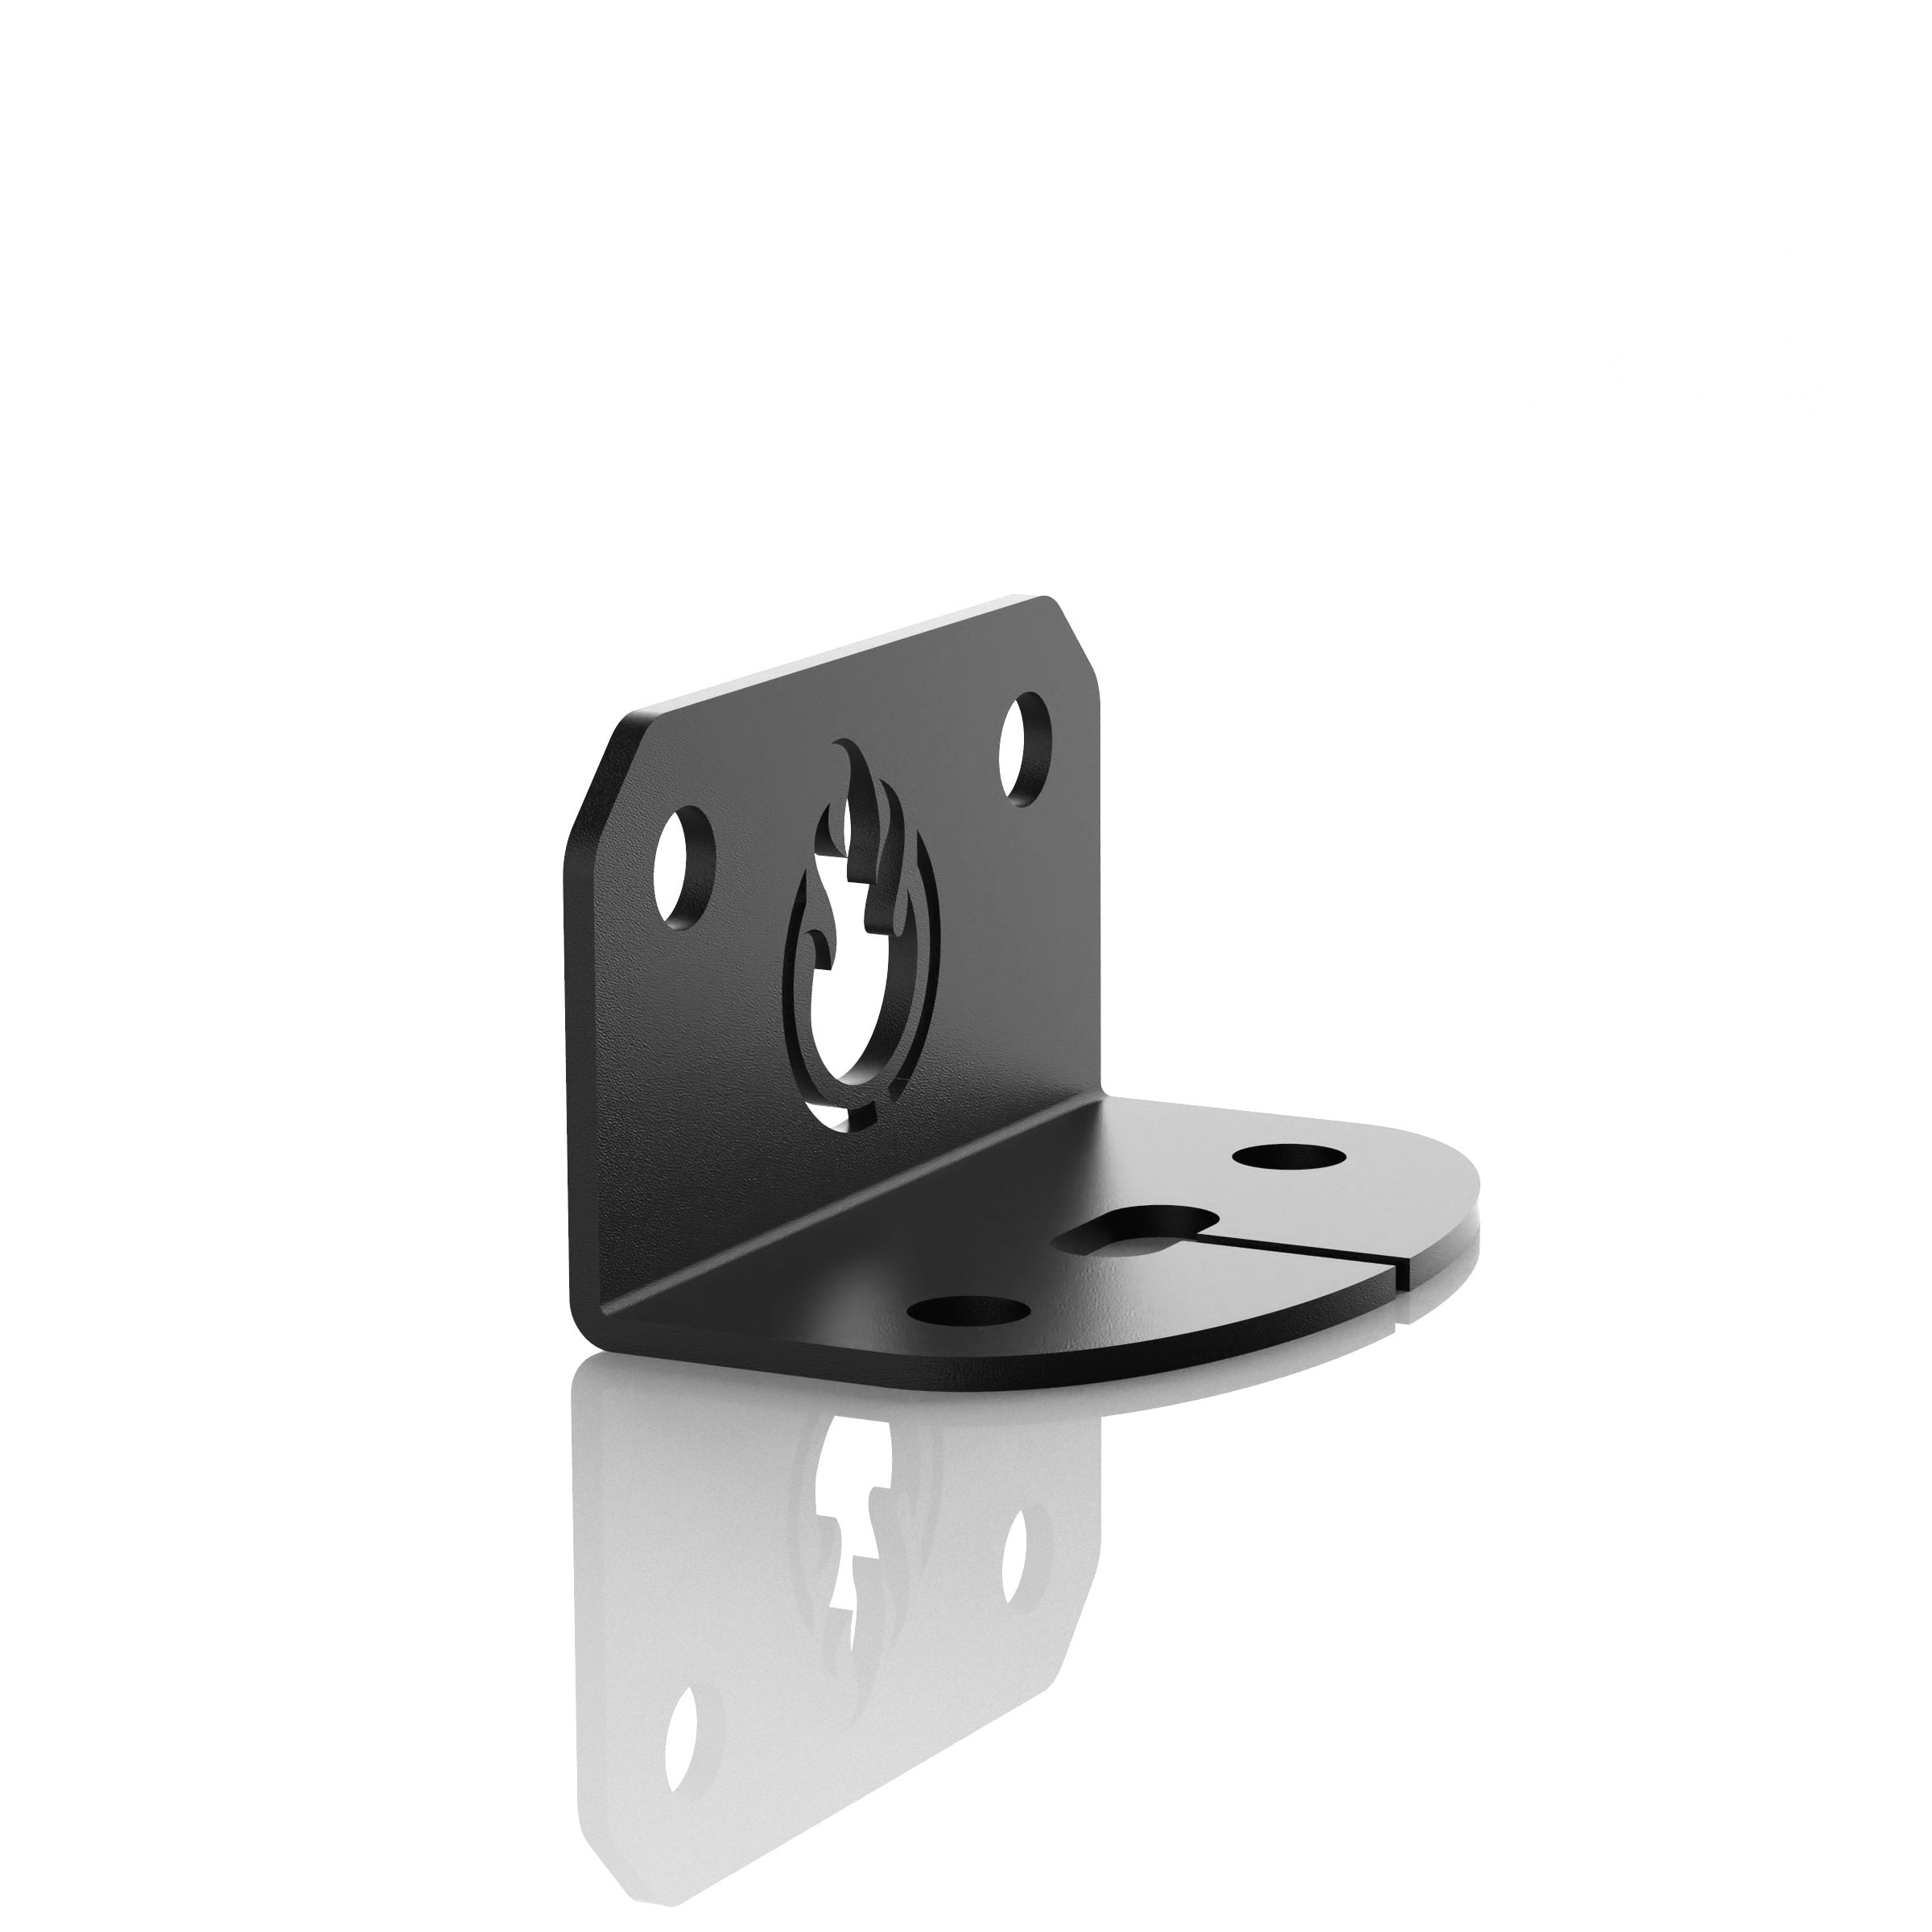 Litt Industries halo billet 90 degree bracket Easily mount rock or accessory lights with our mounting brackets Each mount is powder coated black Hardware included